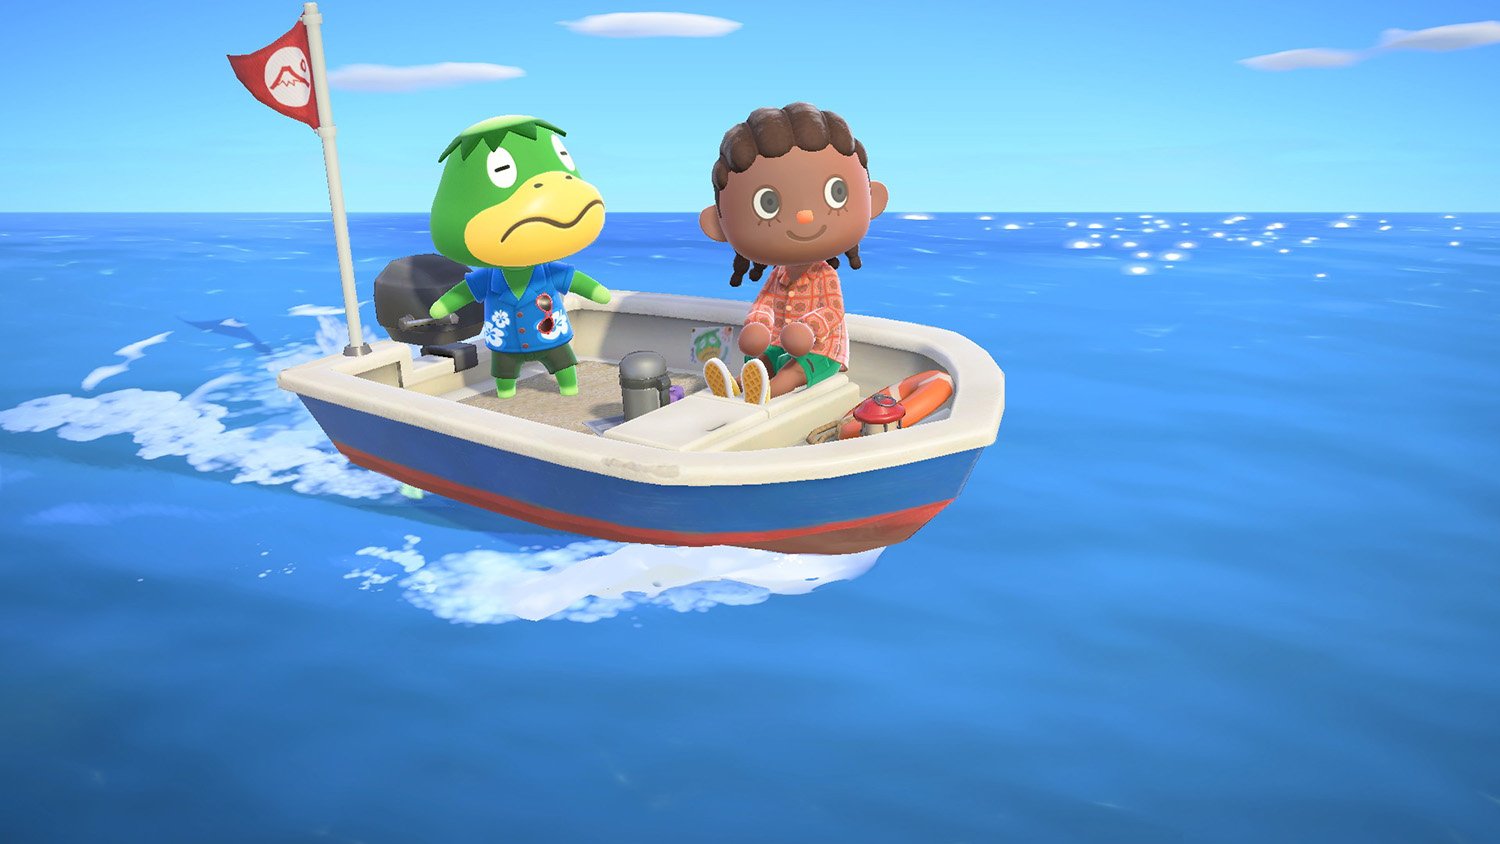 Animal Crossing: New Horizons' Kapp'n takes player for a boat ride.